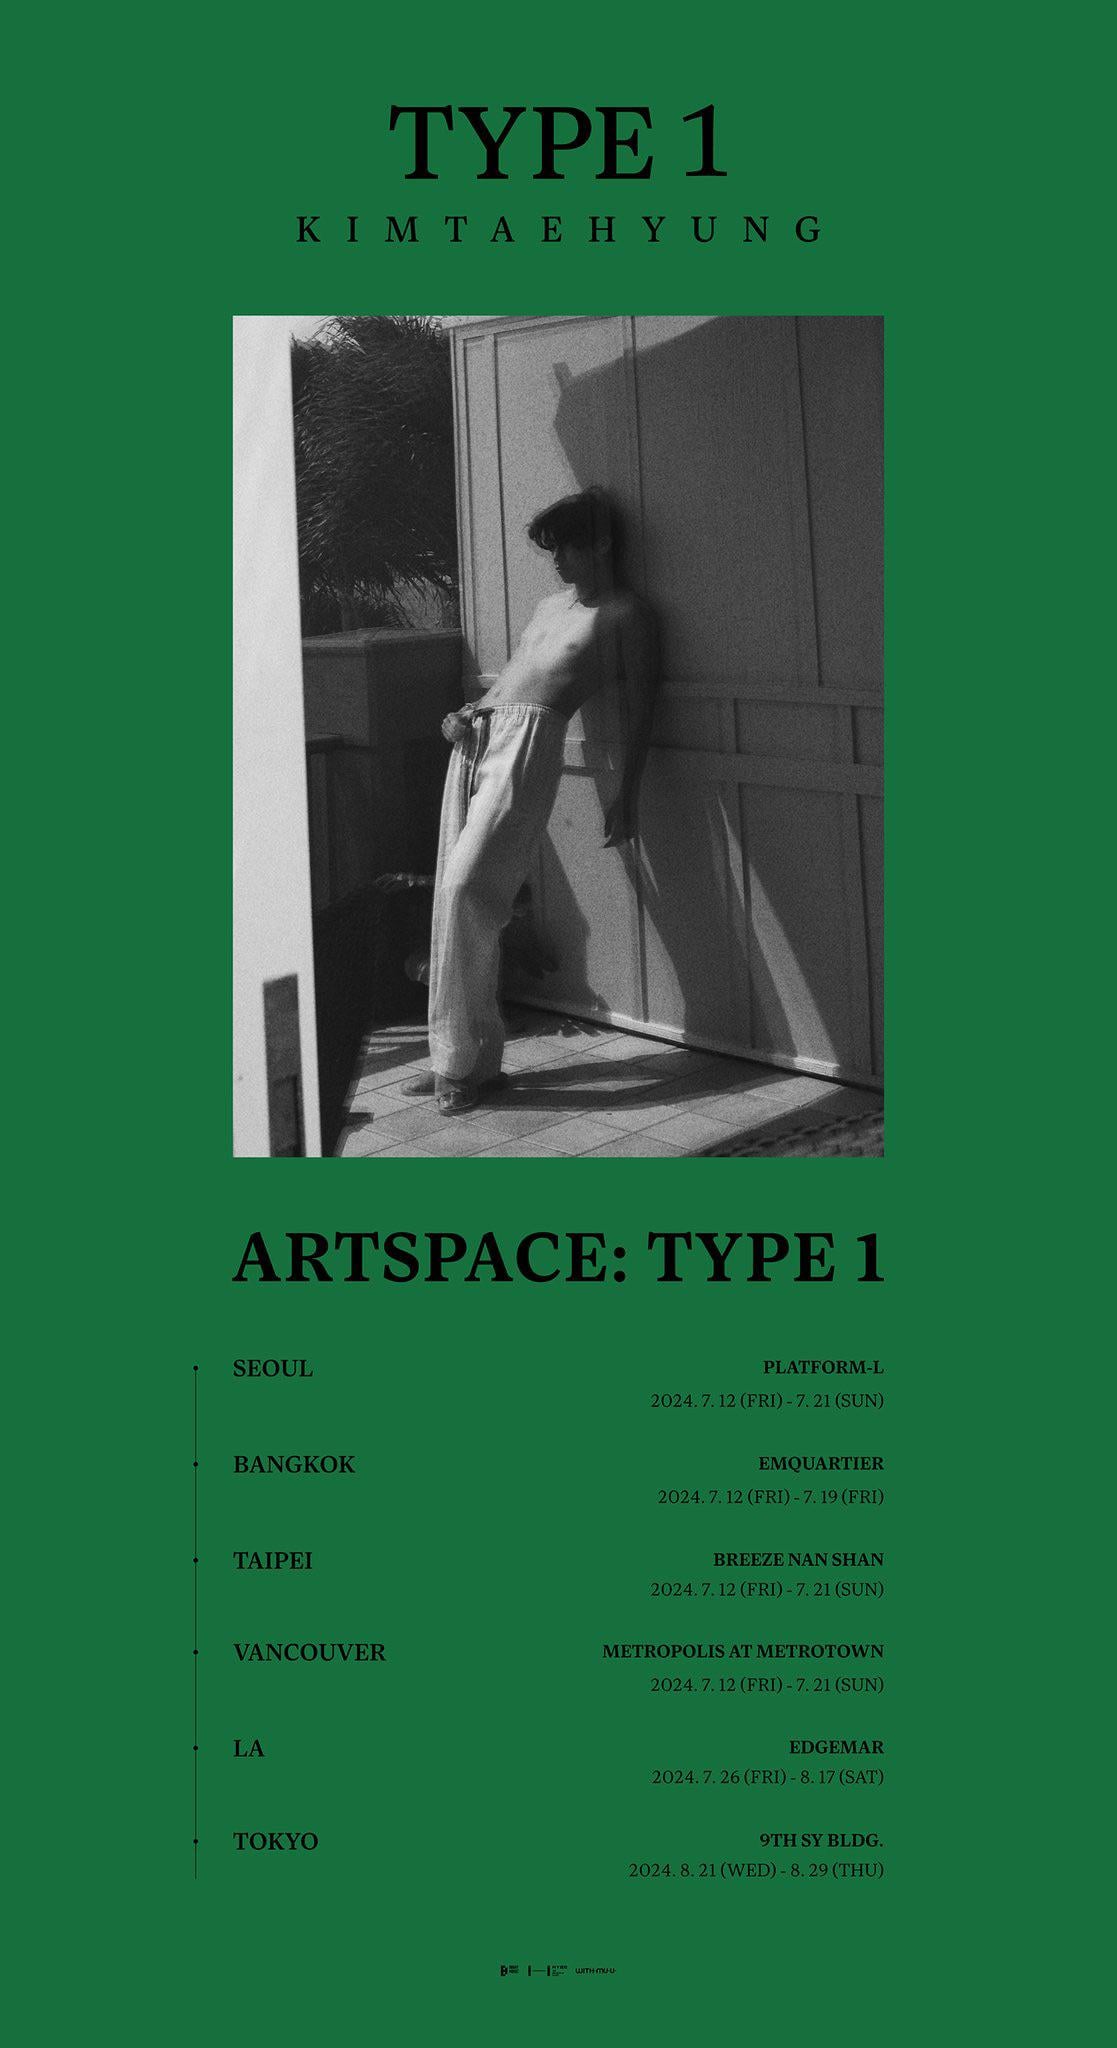 [Notice] Guide to viewing <ARTSPACE: TYPE 1> commemorating the release of V’s photobook ‘TYPE 1’ (+ENG/JPN/CHN) - 030724